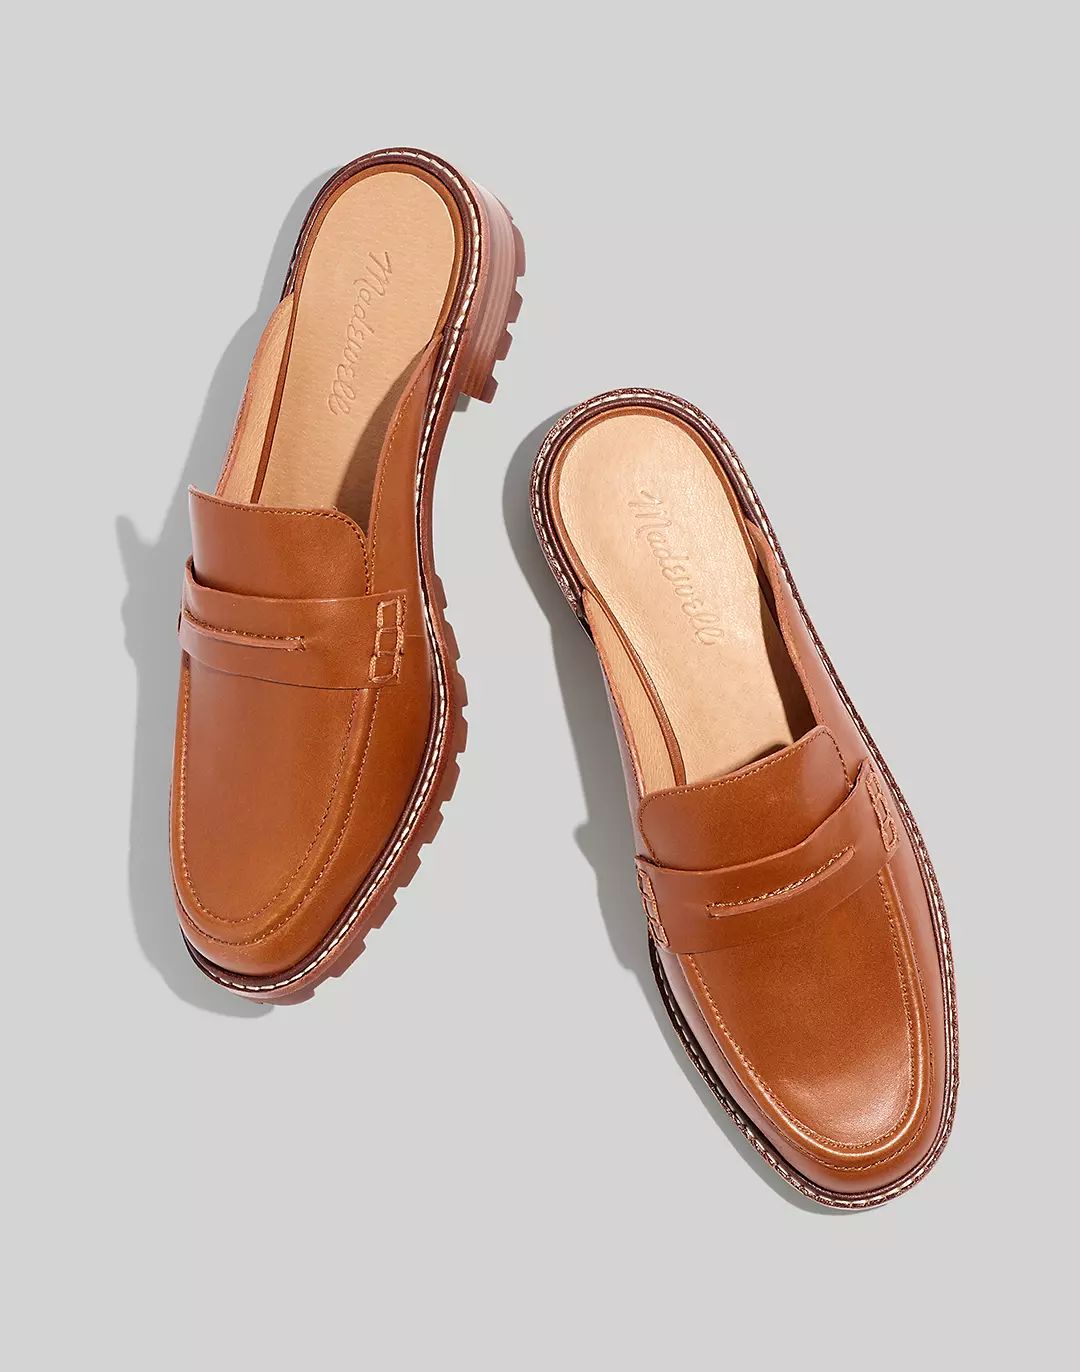 The Corinne Lugsole Loafer Mule | Madewell